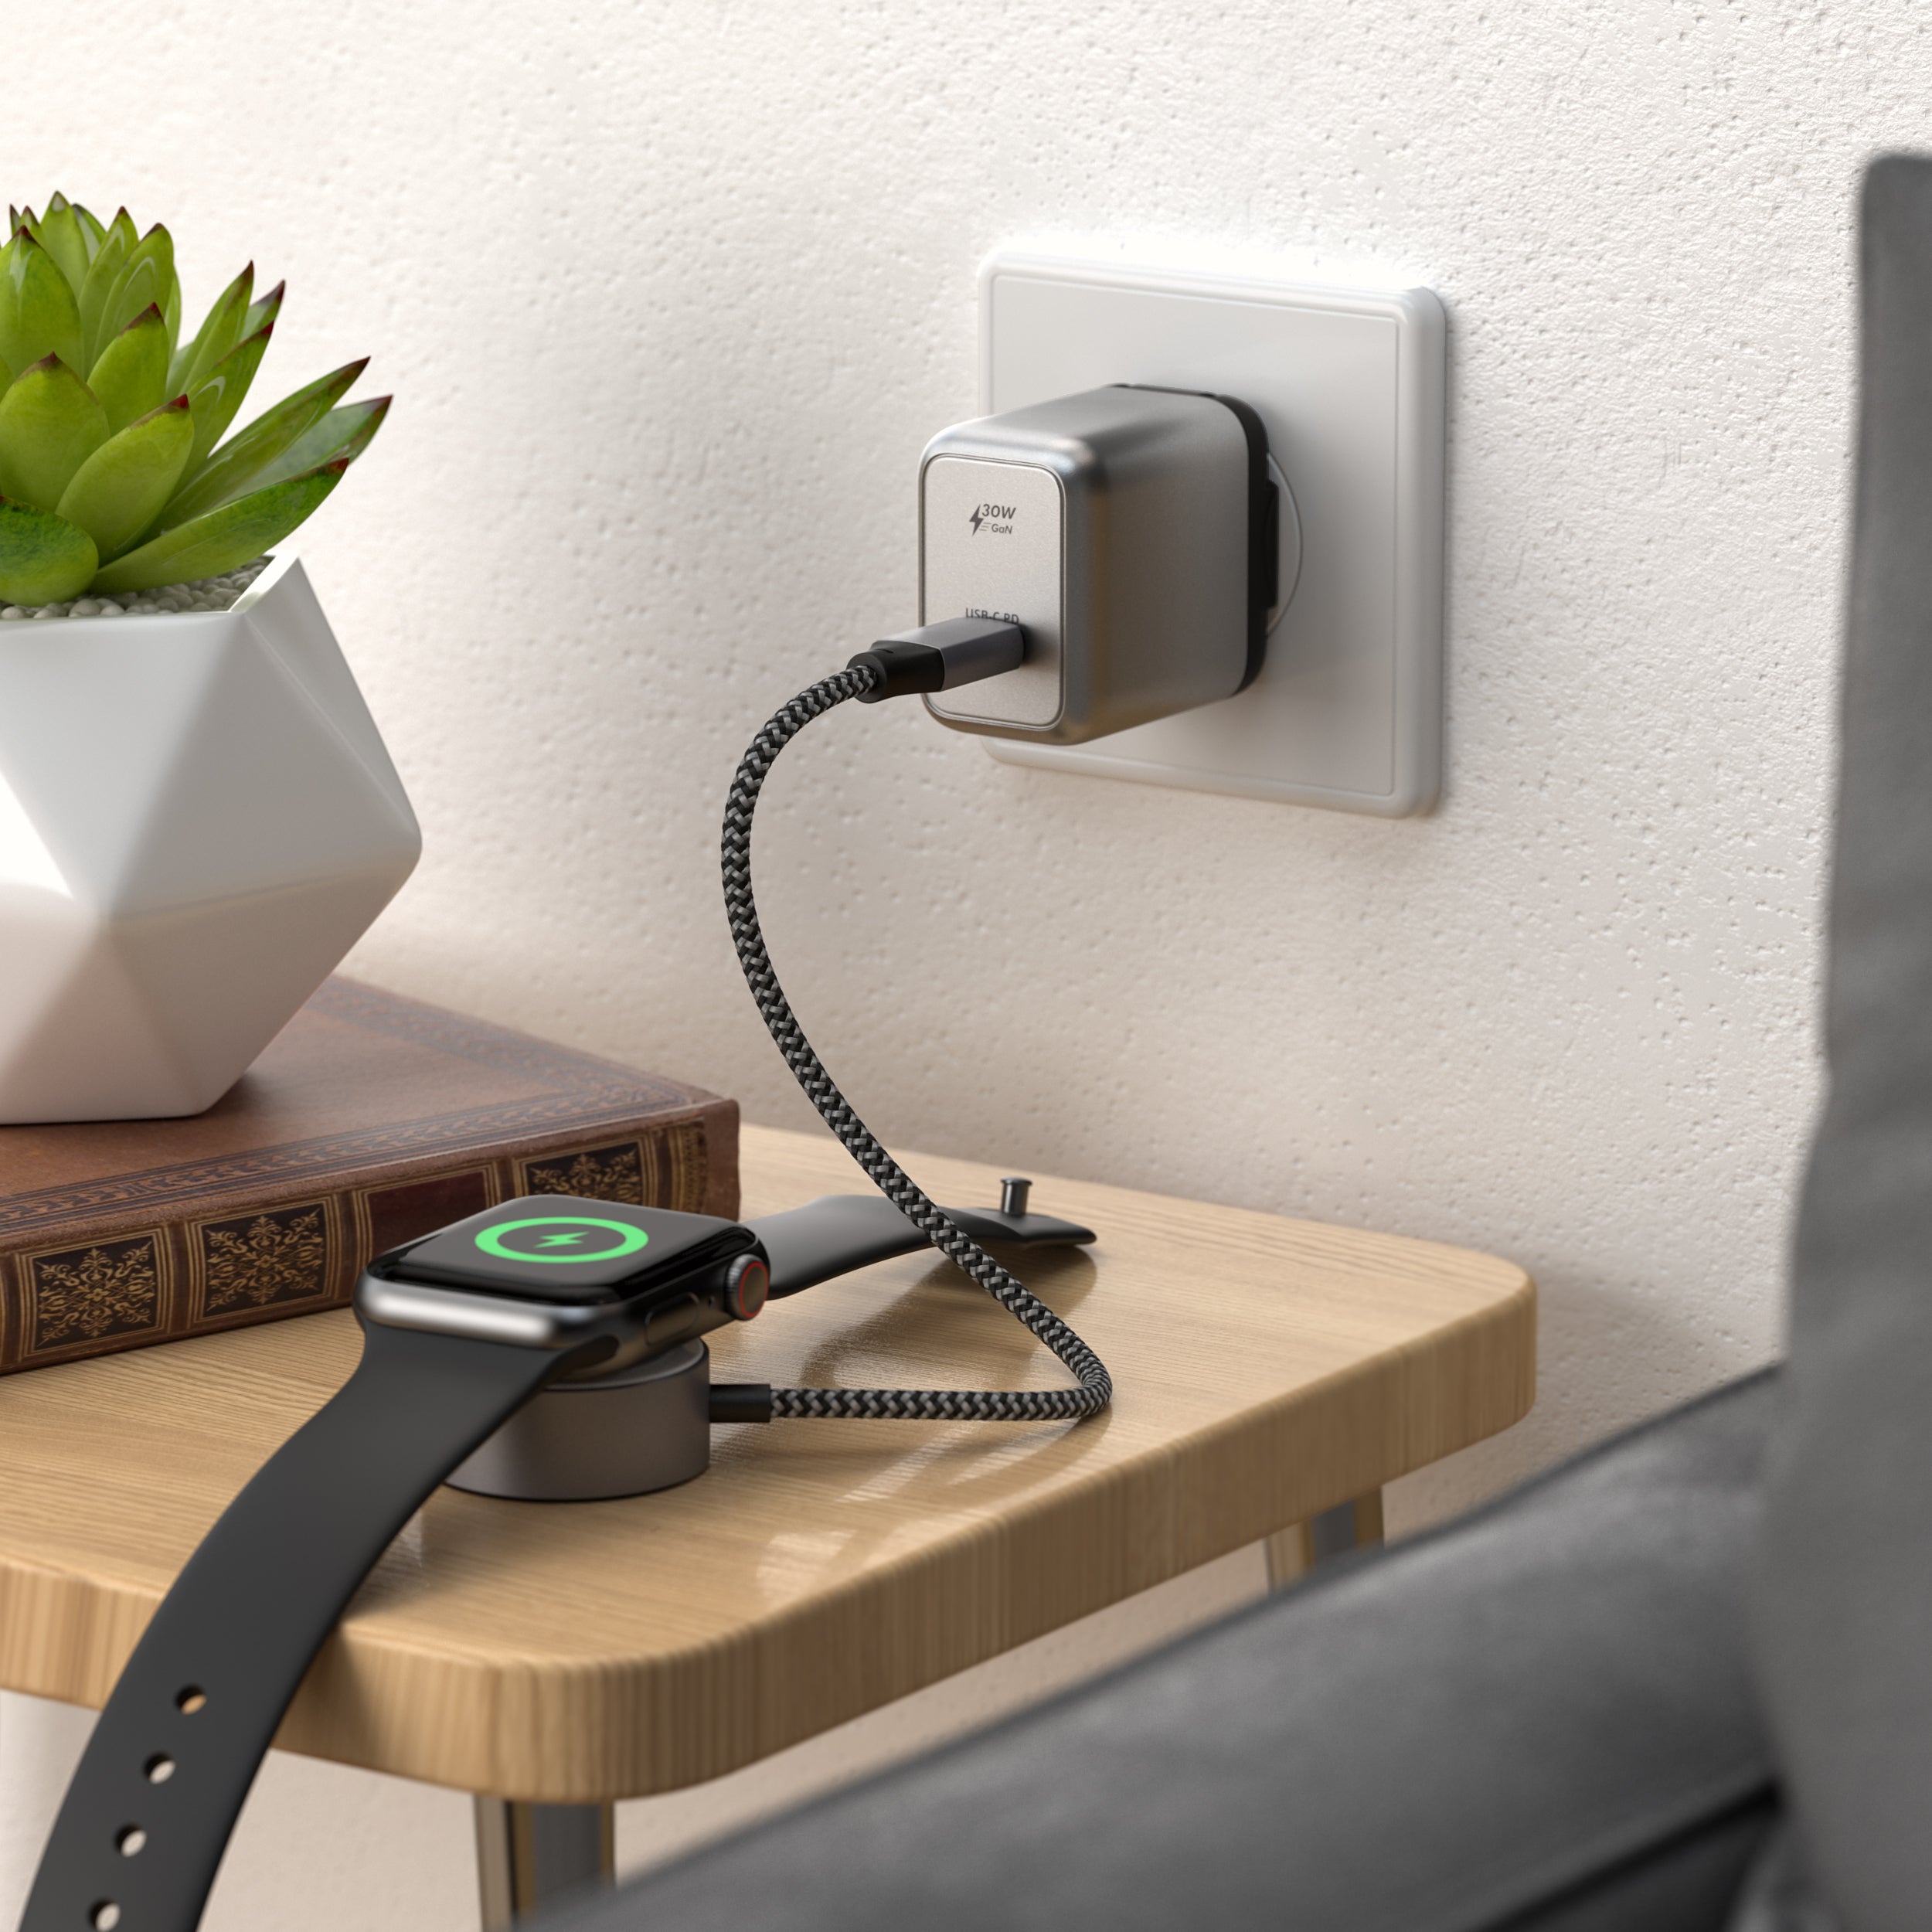 Upgrade to next-gen charging with the Satechi 30W USB-C PD GaN Wall Charger, featuring powerful Gallium nitride (GaN) technology for a noticeably faster, more efficient charge.